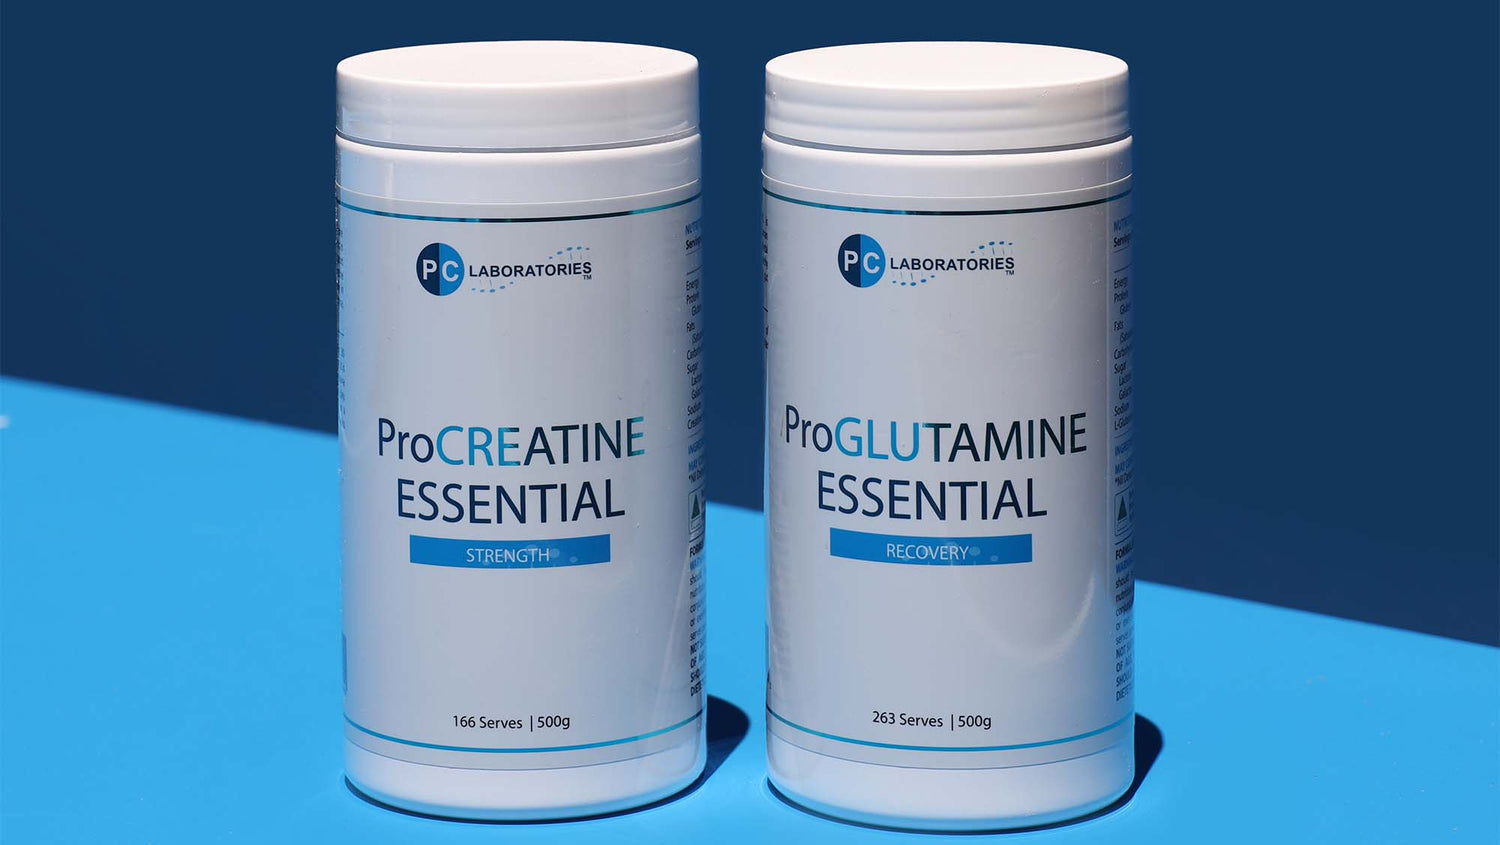 Recovery Supplements by PC Laboratories